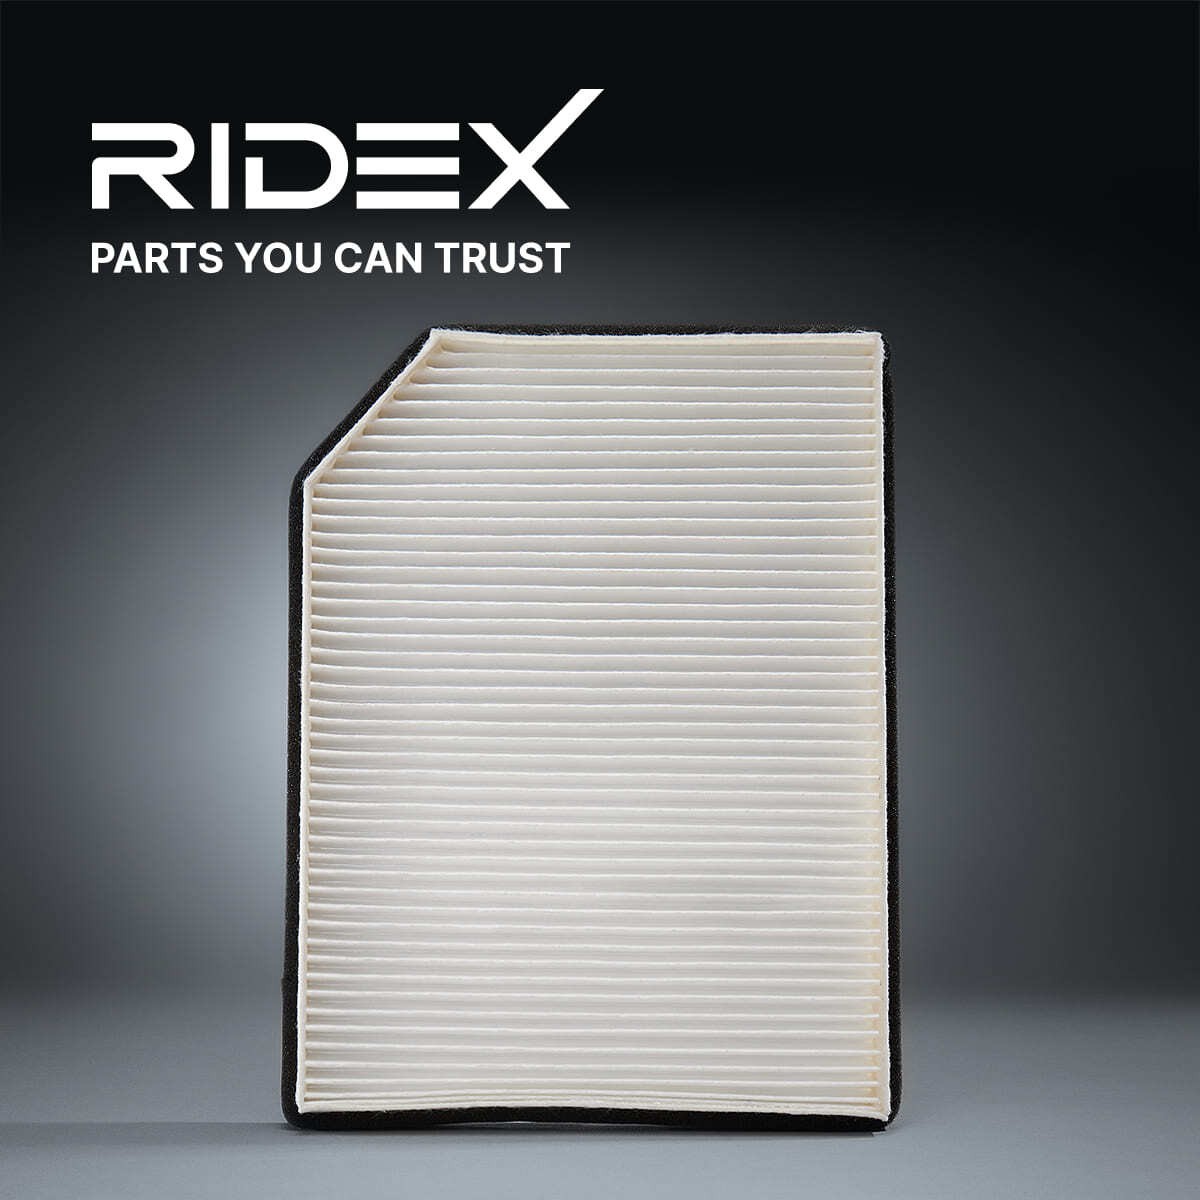 RIDEX 424I0002 Air conditioner filter Activated Carbon Filter, 287,1 mm x 214,5 mm x 57 mm